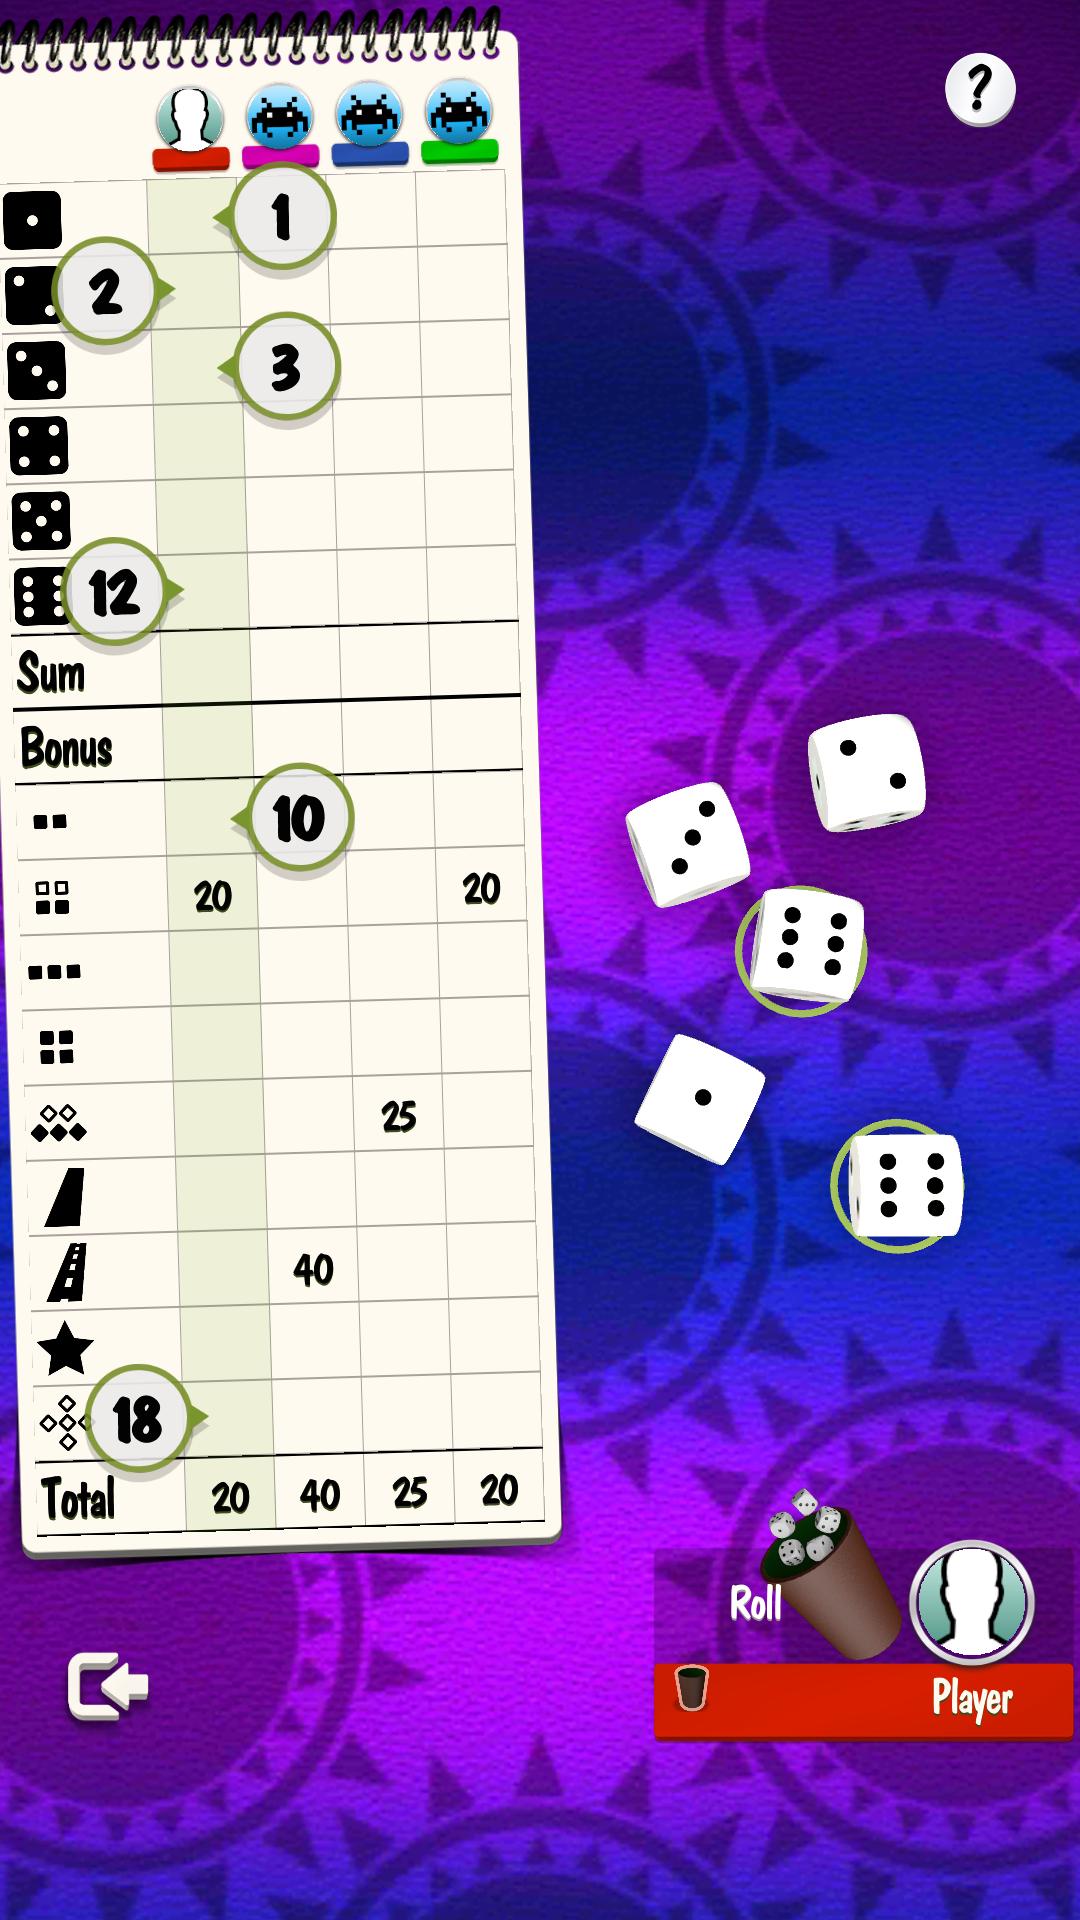 Yatzy Offline and Online - free dice game 3.3.4 Screenshot 2